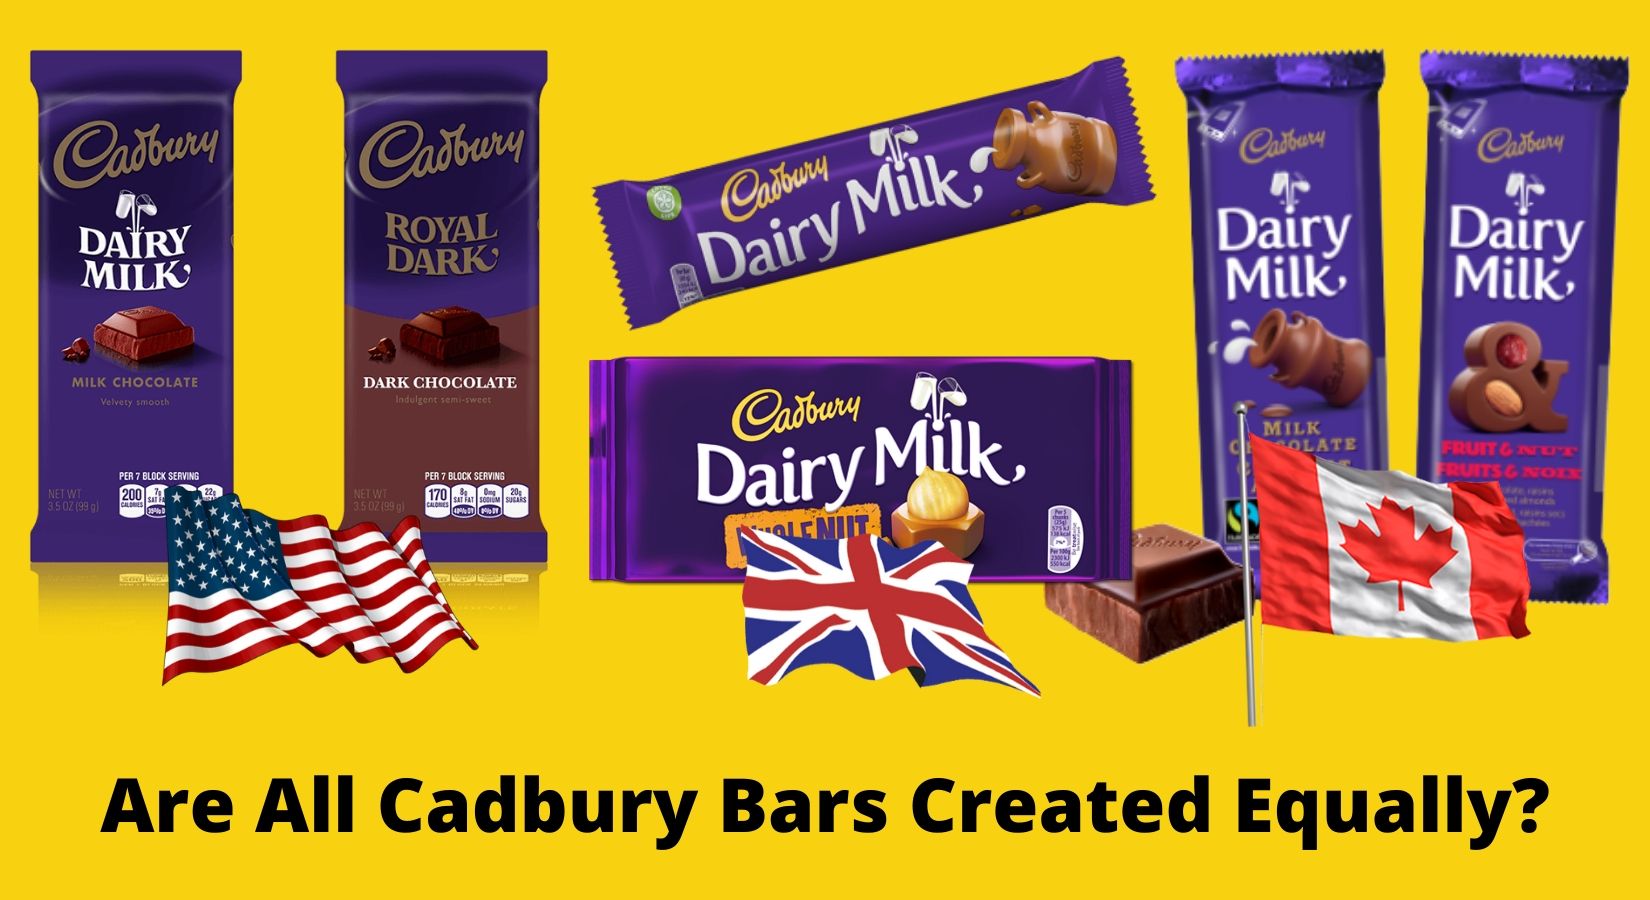 Can you buy Cadbury chocolate in the United States? If so, where